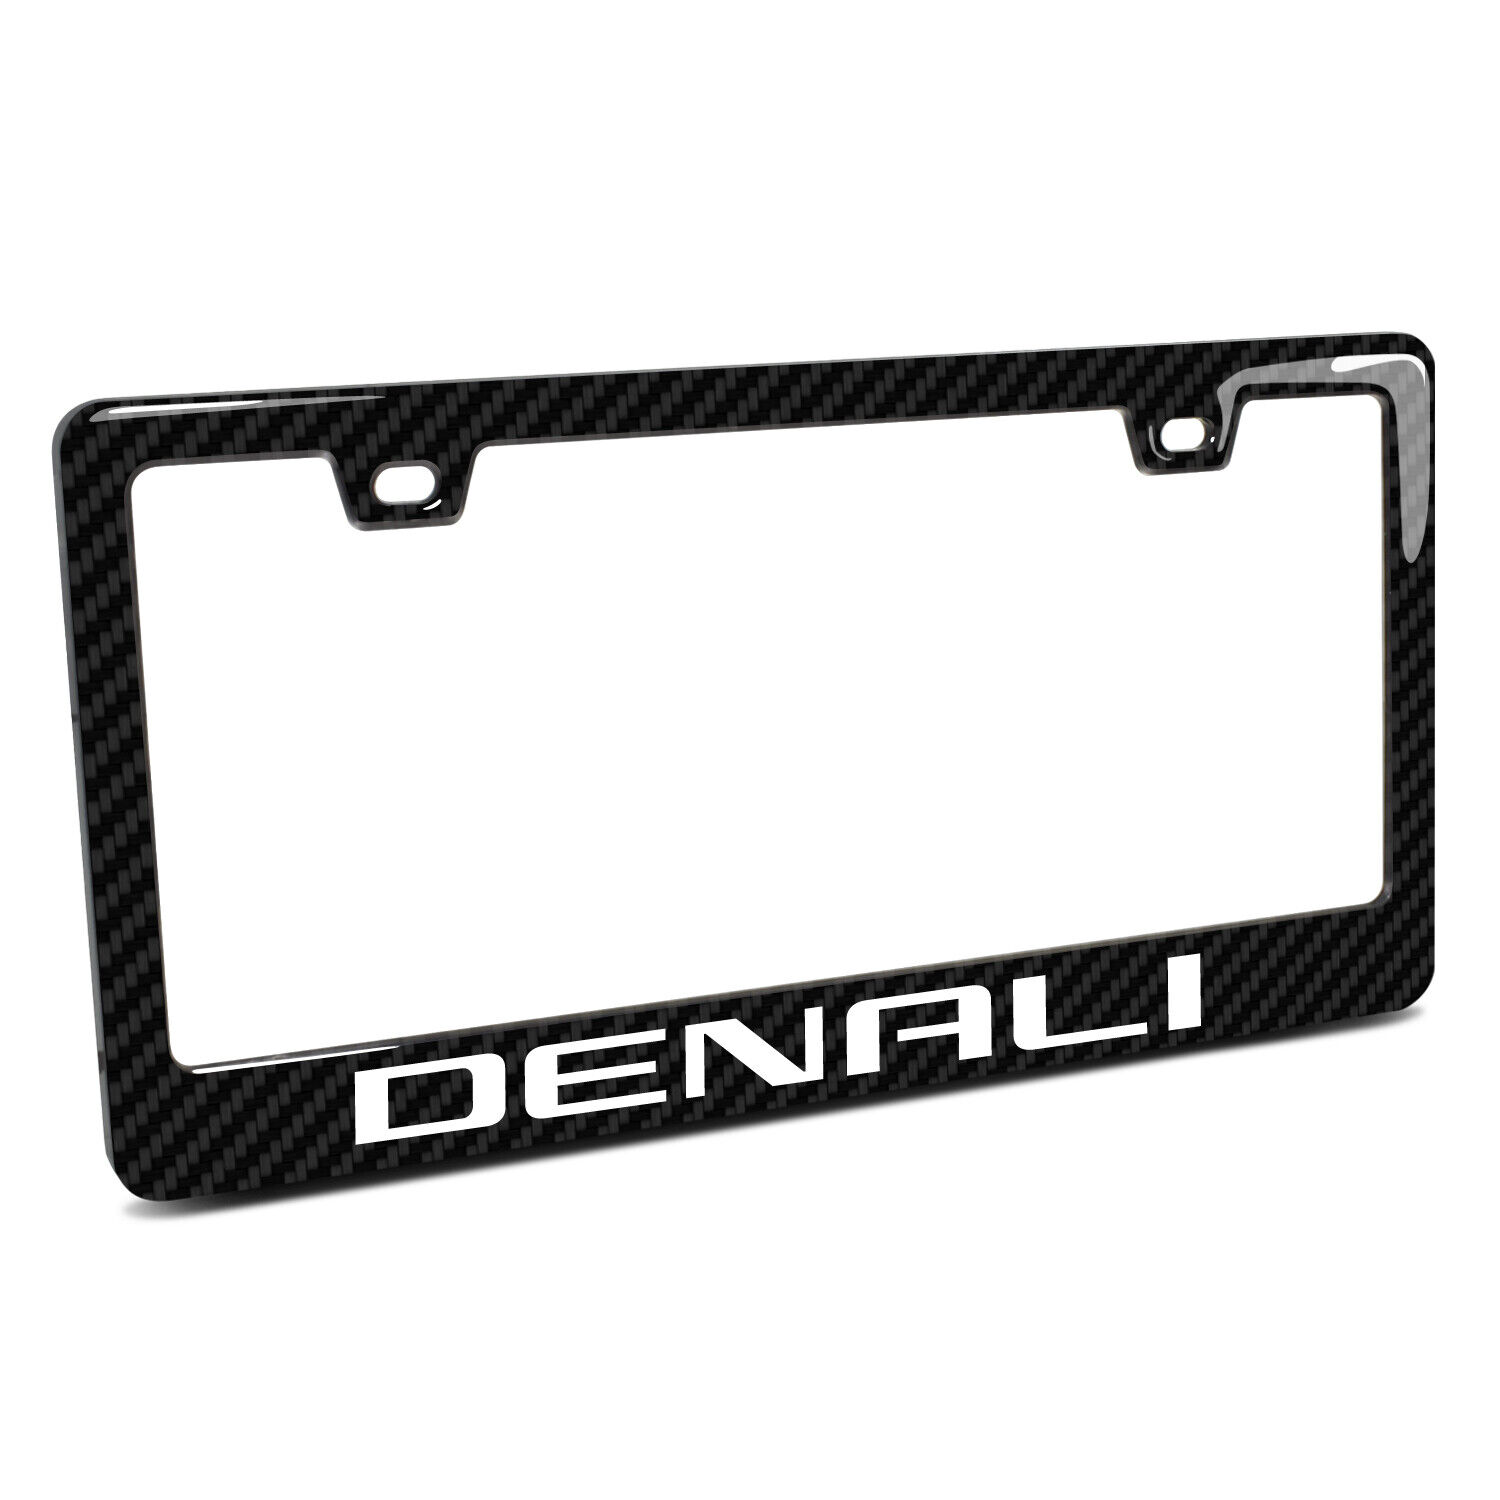 GMC Denali in 3D on on Real Carbon Fiber Finish ABS Plastic License Plate Frame